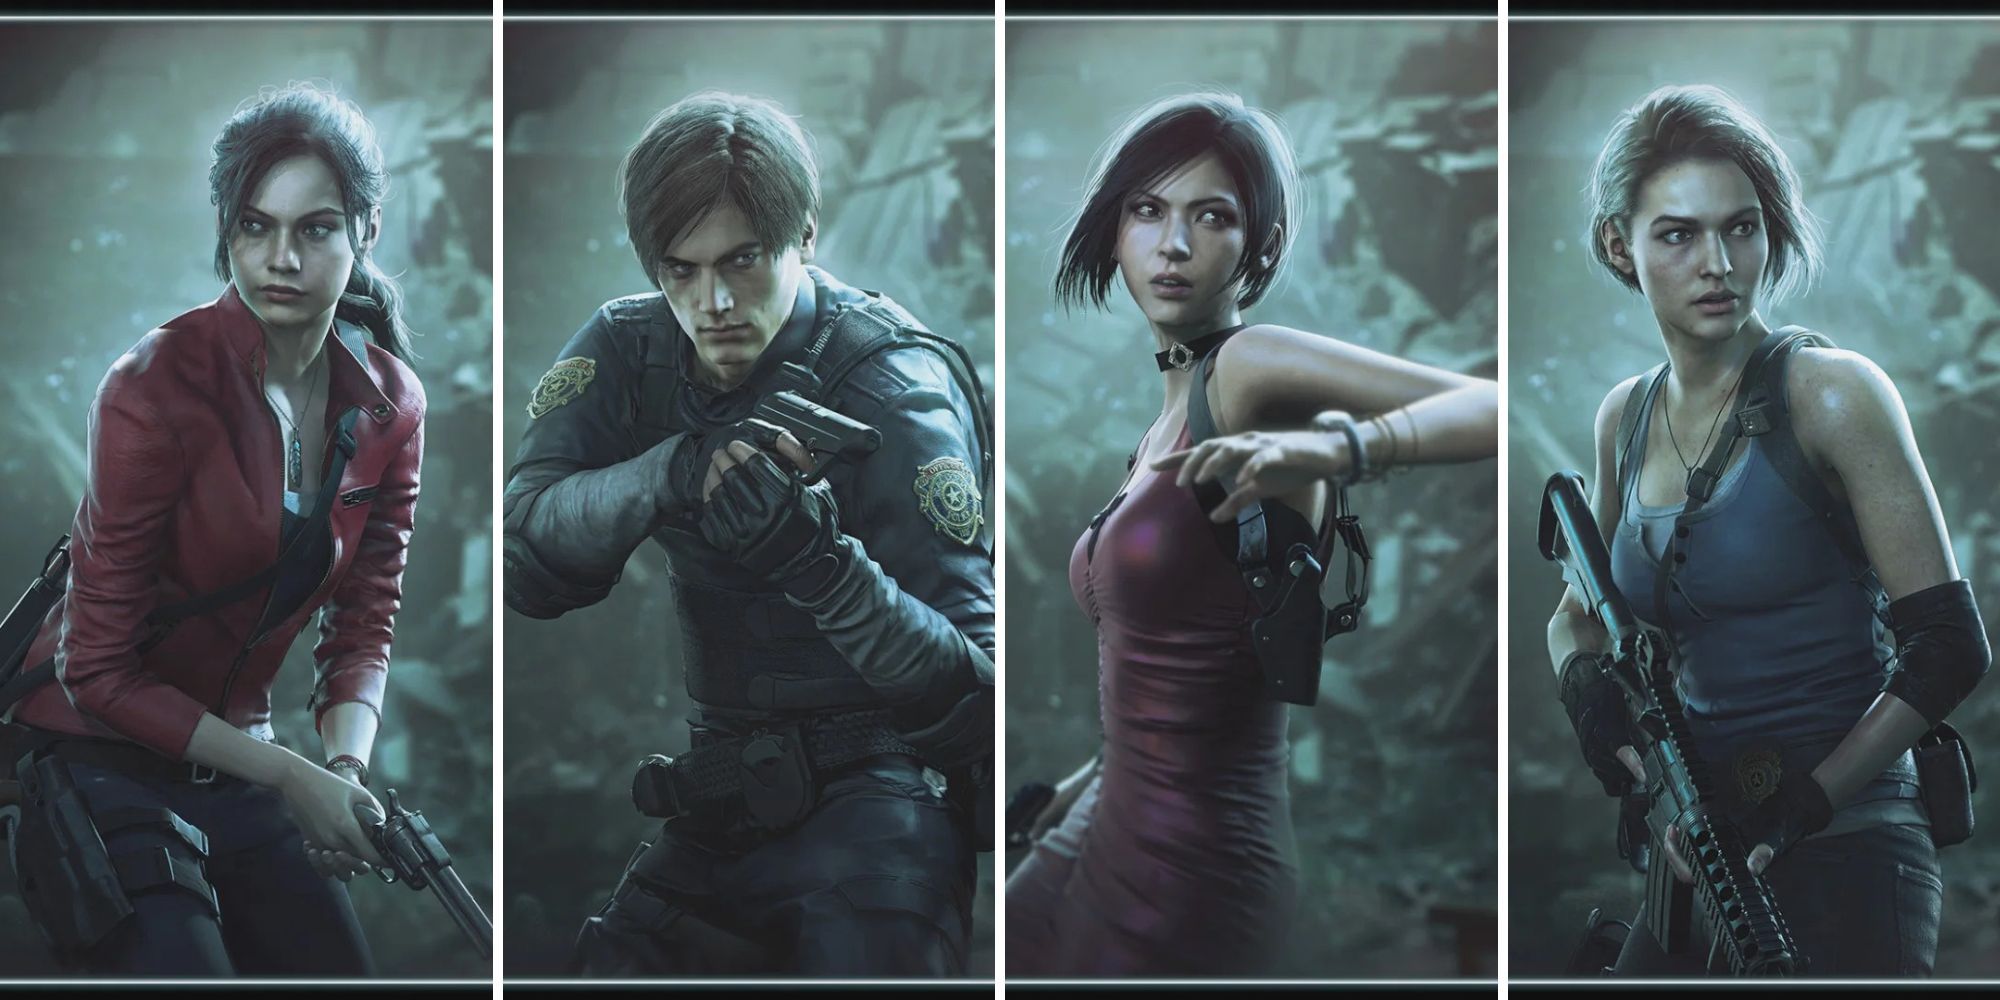 Everything You Need To Know About Resident Evil RE: Verse